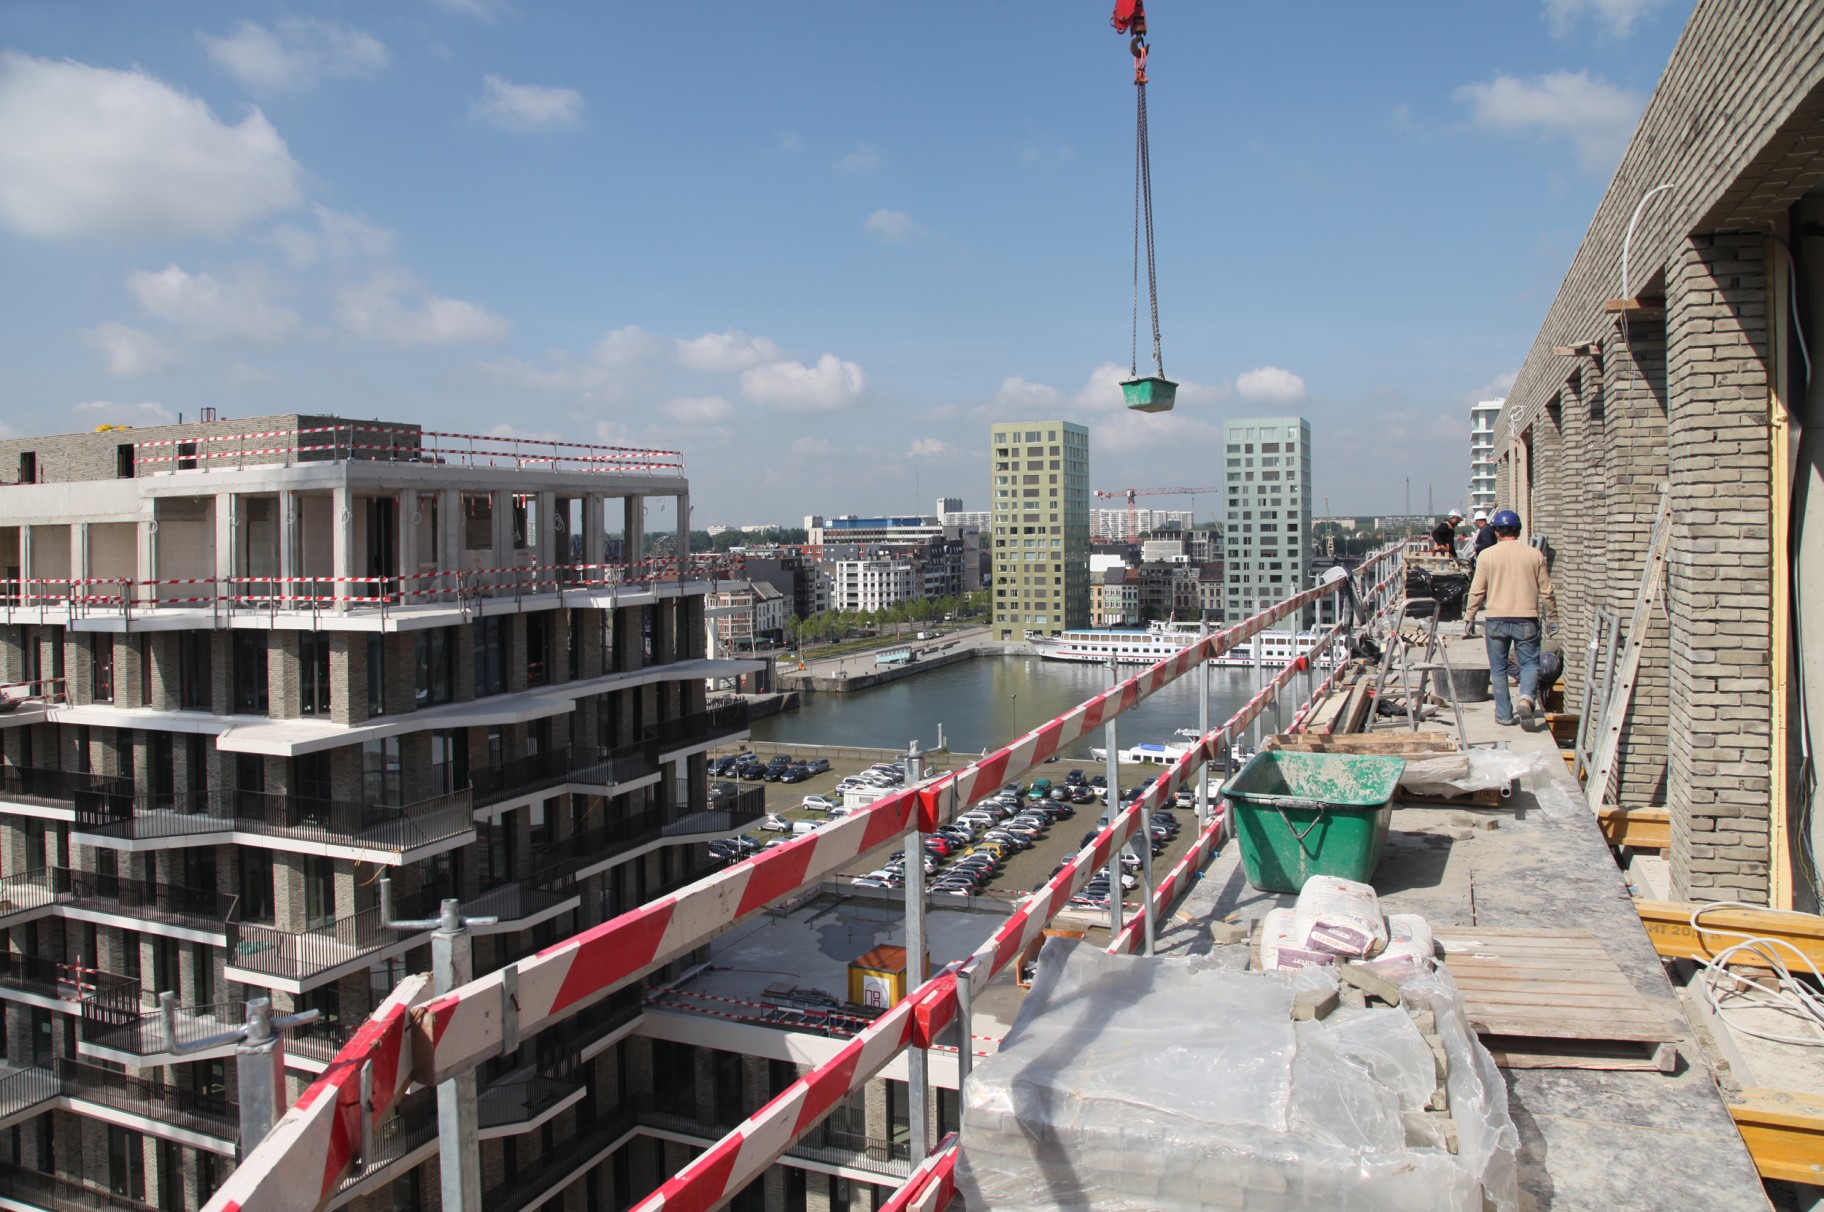 Construction sites of Cadiz and Parkhof open for public during Open Construction Site Day 2015